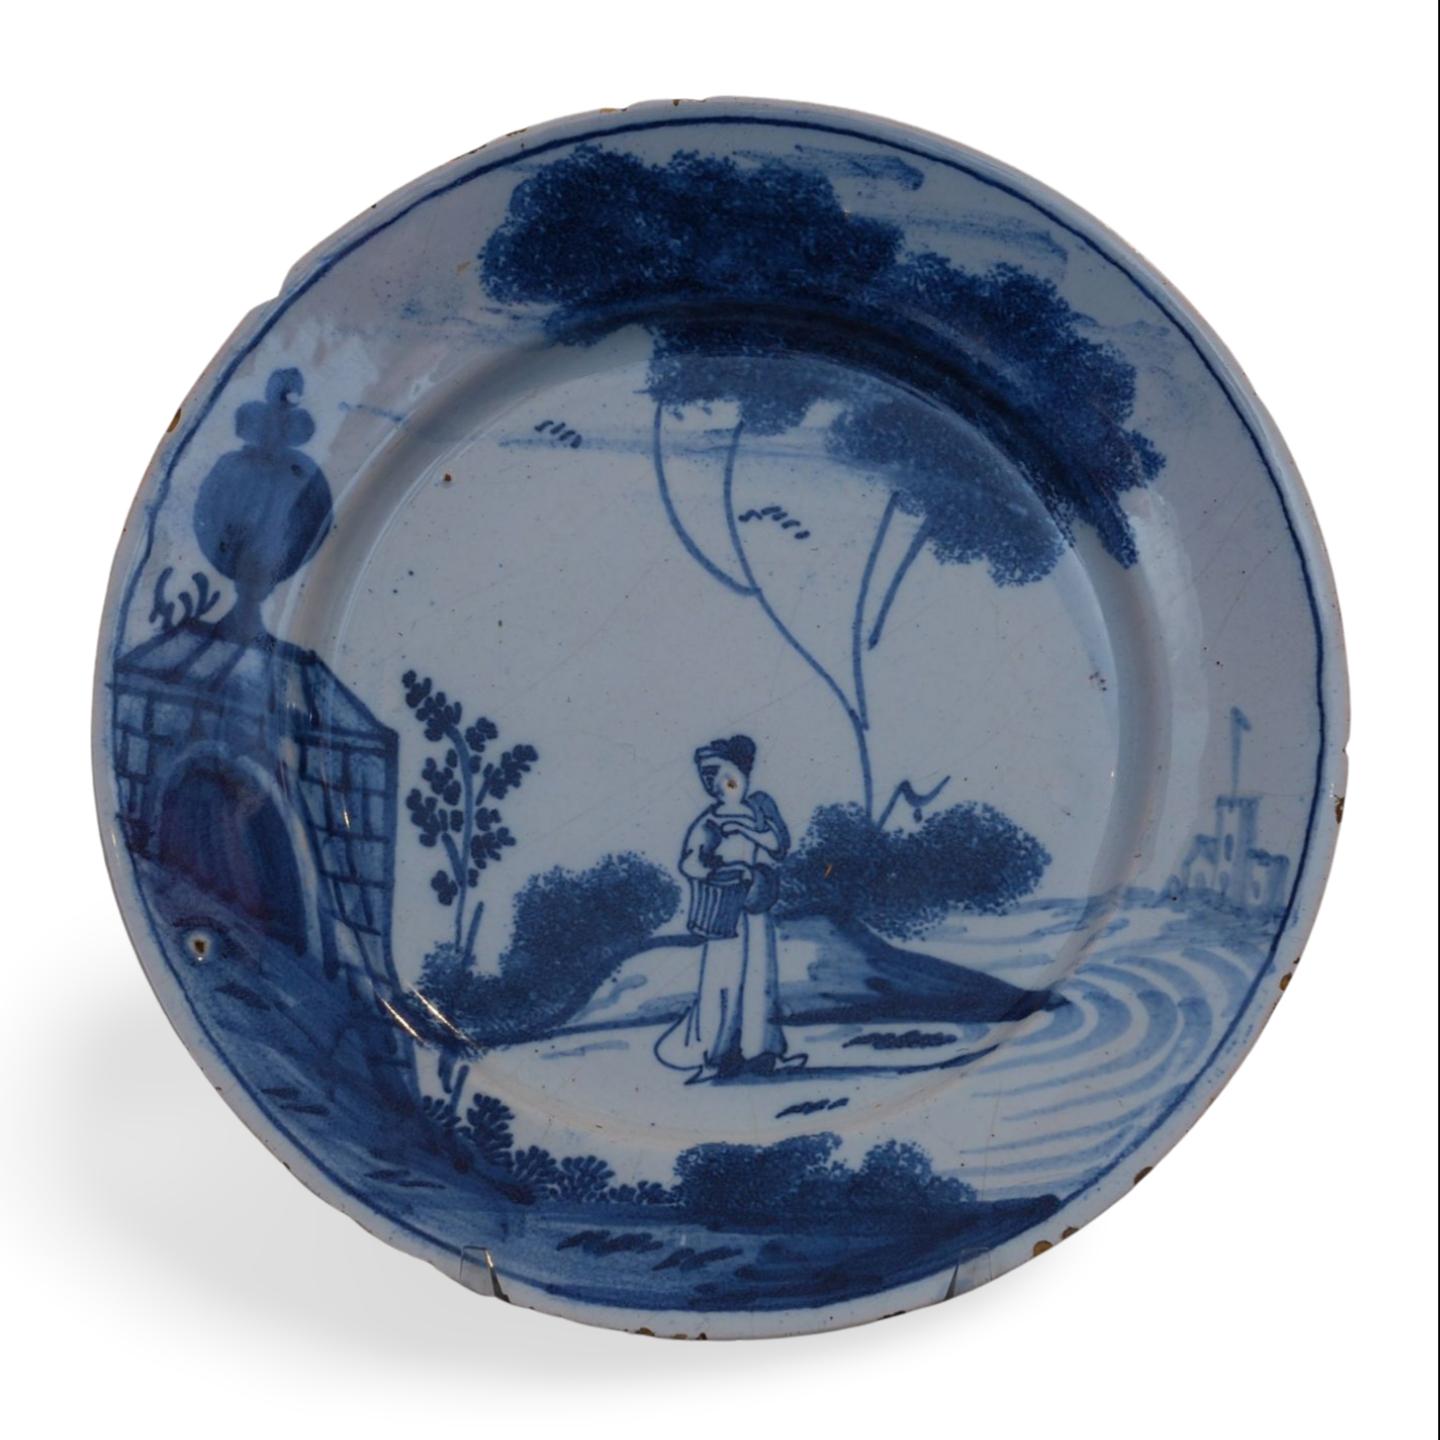 Tin-glazed earthenware, decorated with a woman in a landscape. Known as a monument plate, after the monument surmounted by a vase.

Prov: Troy Chappell coll., from Allister Sampson.

English Delftware is considered to be one of the most important